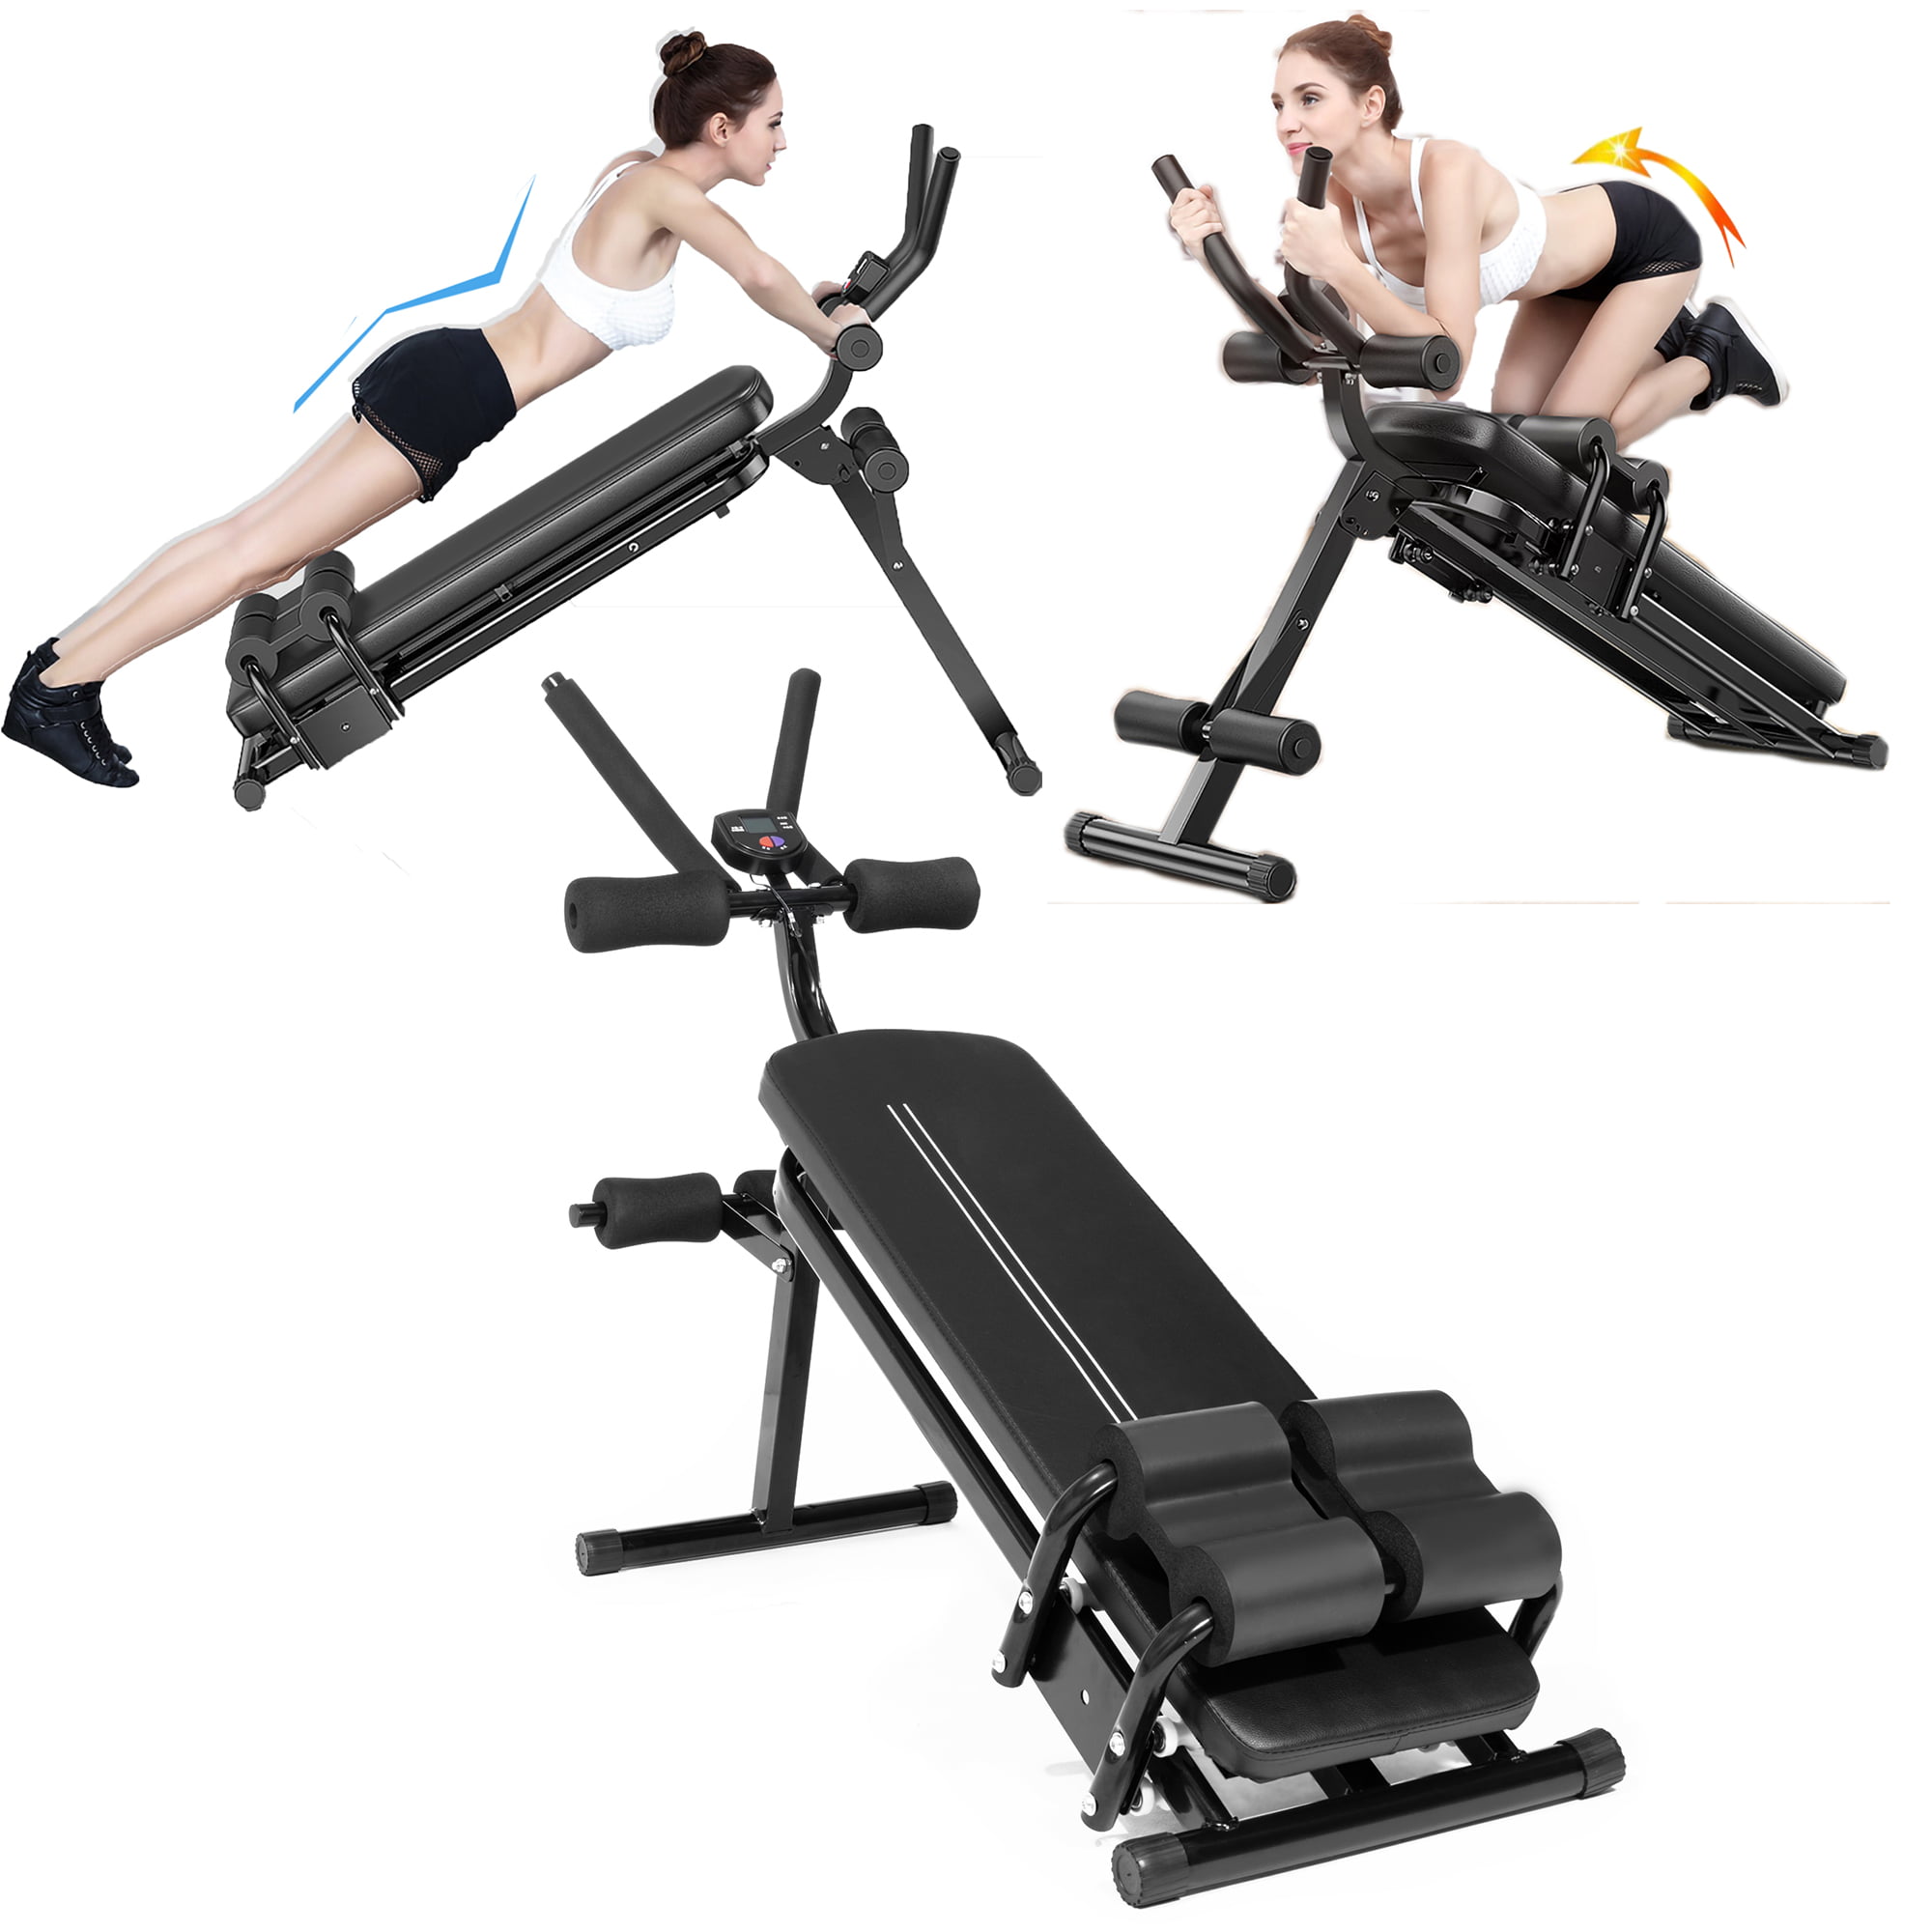 Adjustable Sit Up Bench AB Incline Abs Bench Weight Fitness Home Gym Foldable 